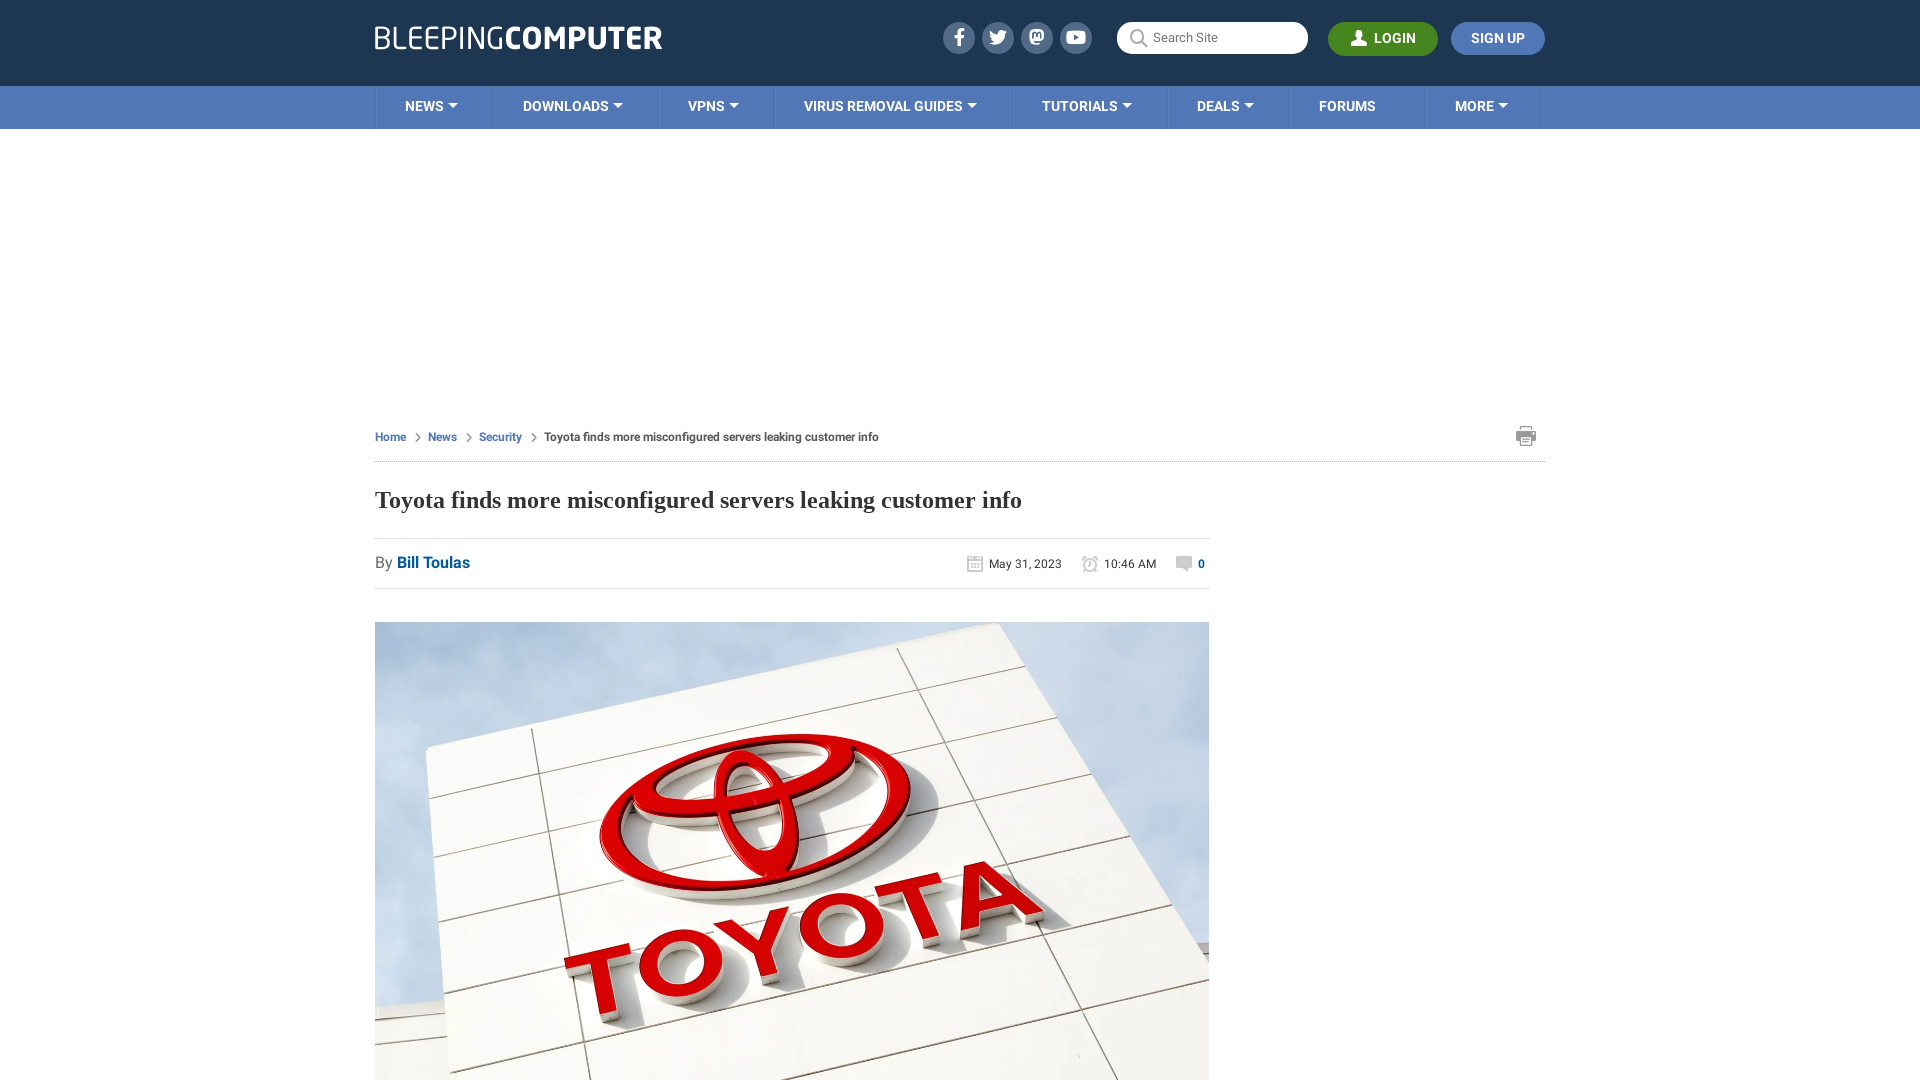 Toyota finds more misconfigured servers leaking customer info